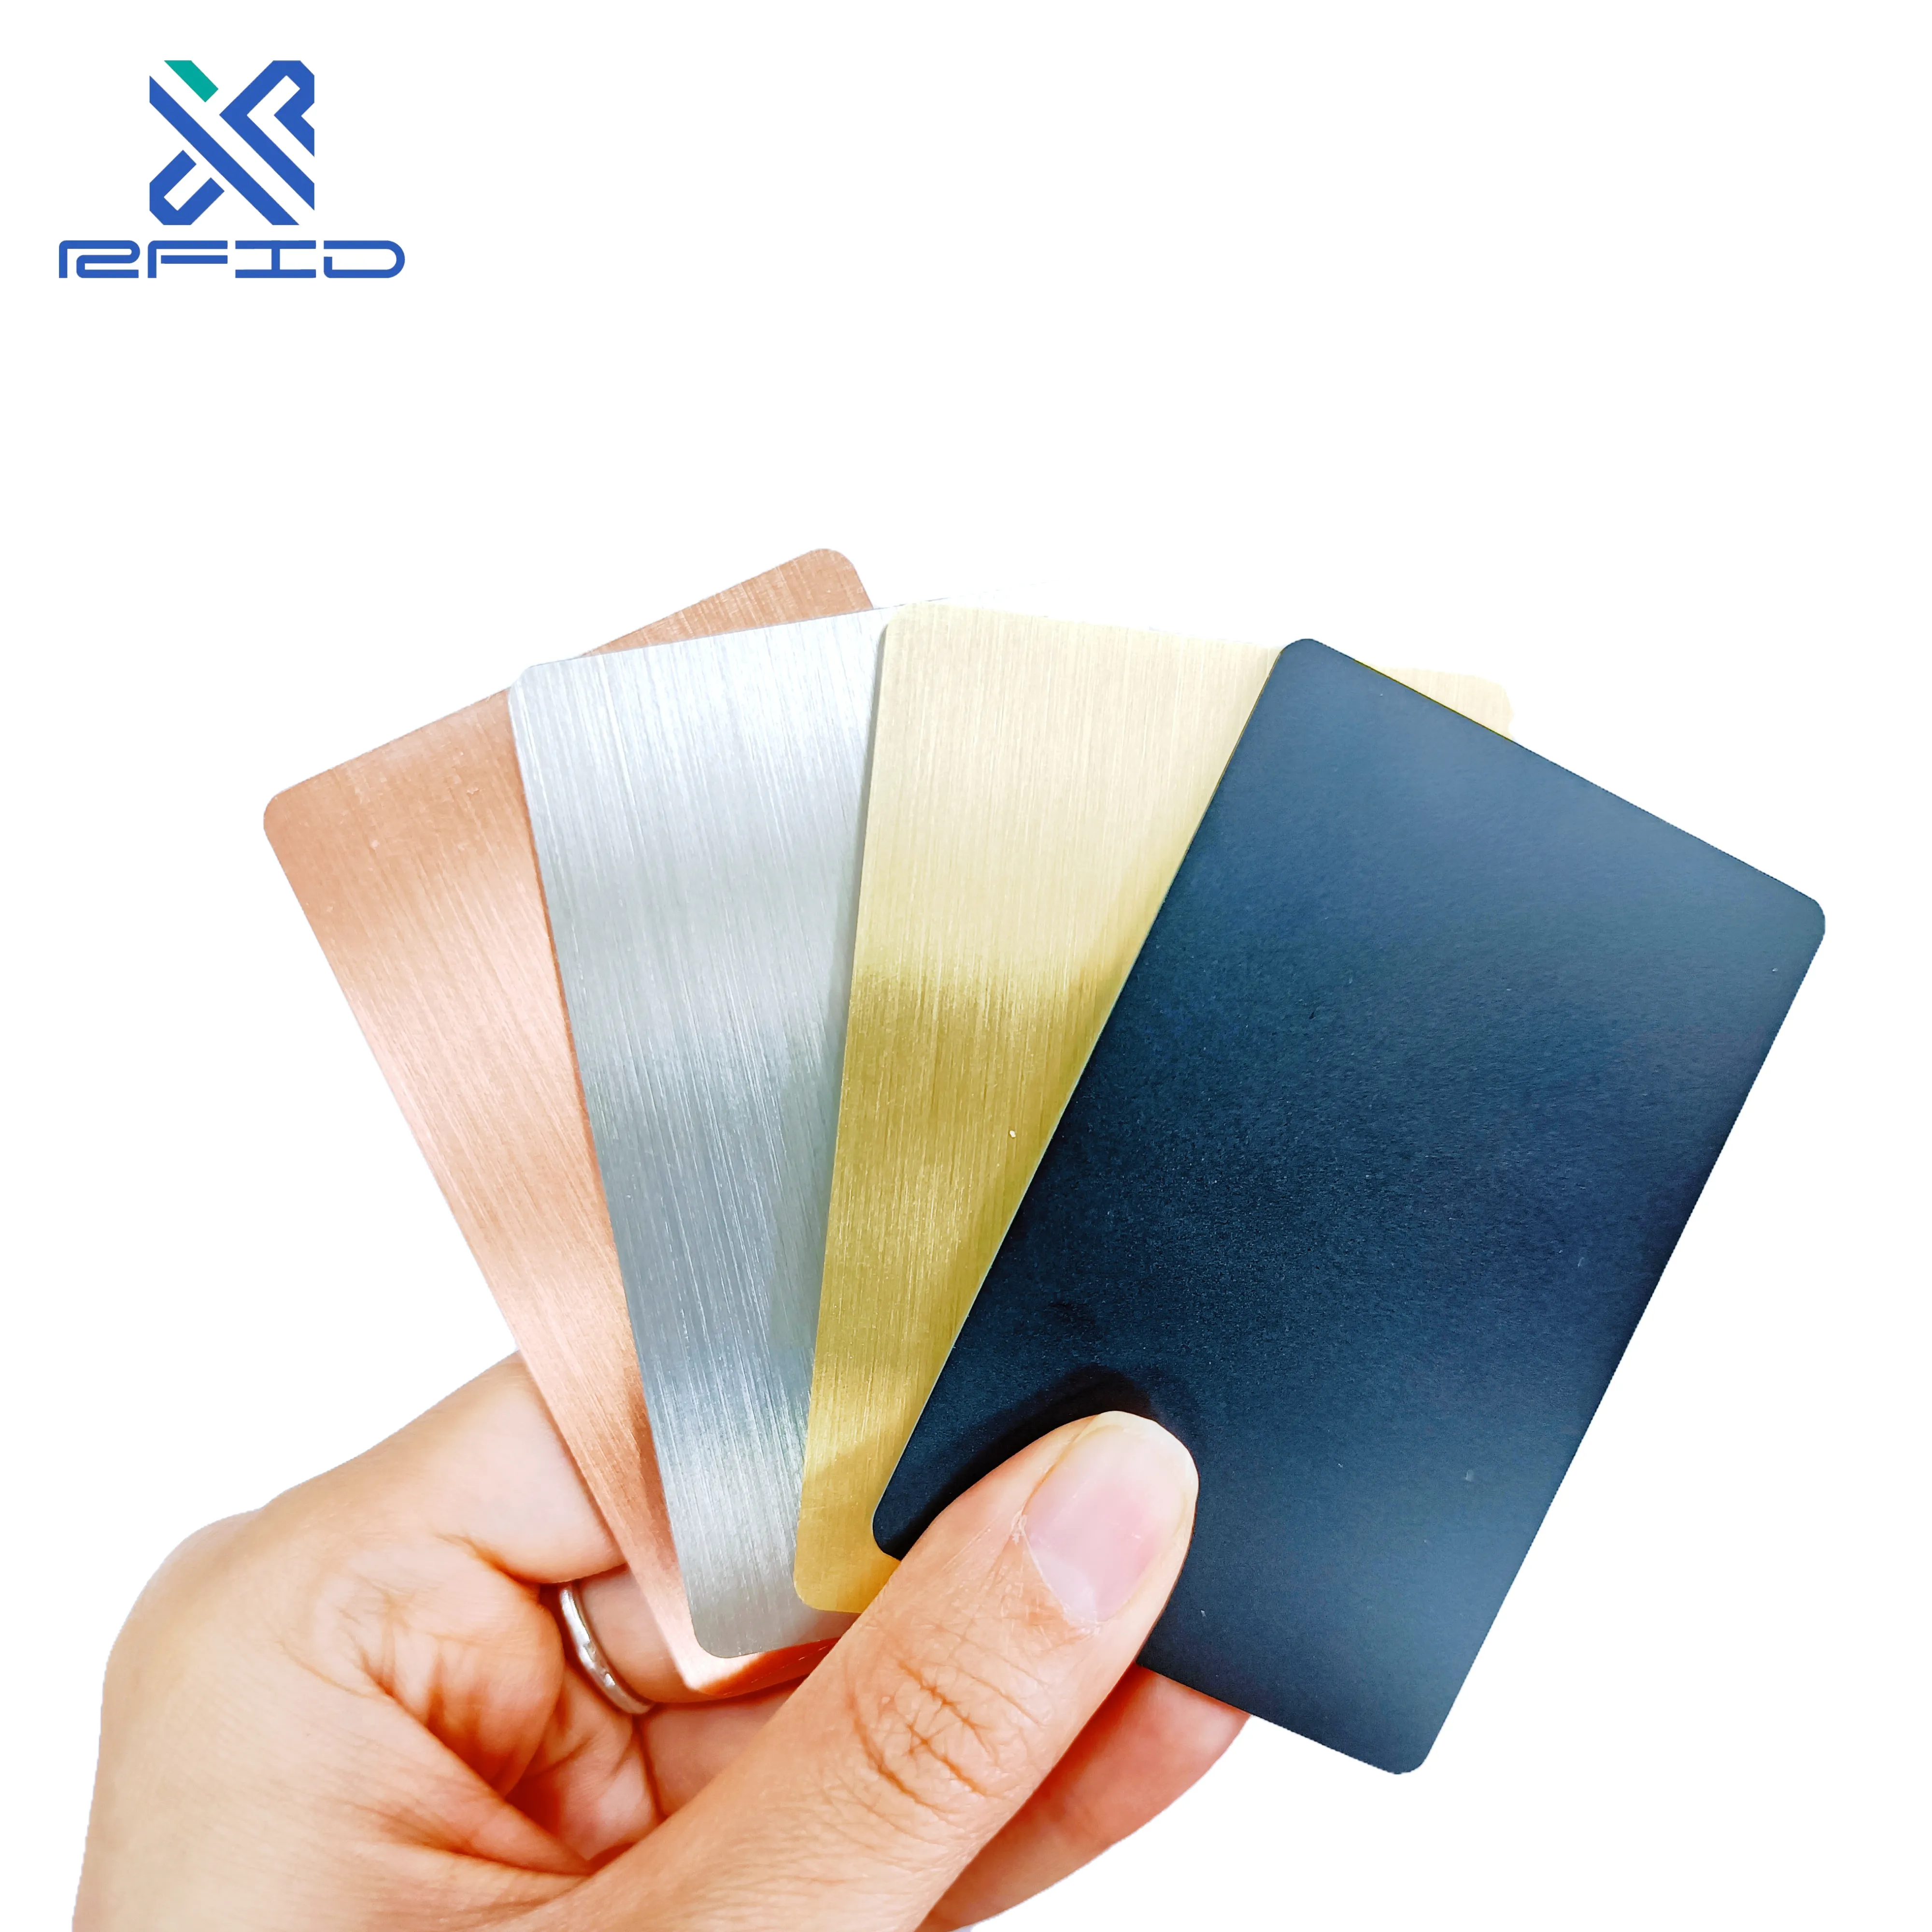 Stainless Steel RFID White Trending Product Black Business Metal NFC brass Card Digital Business Card